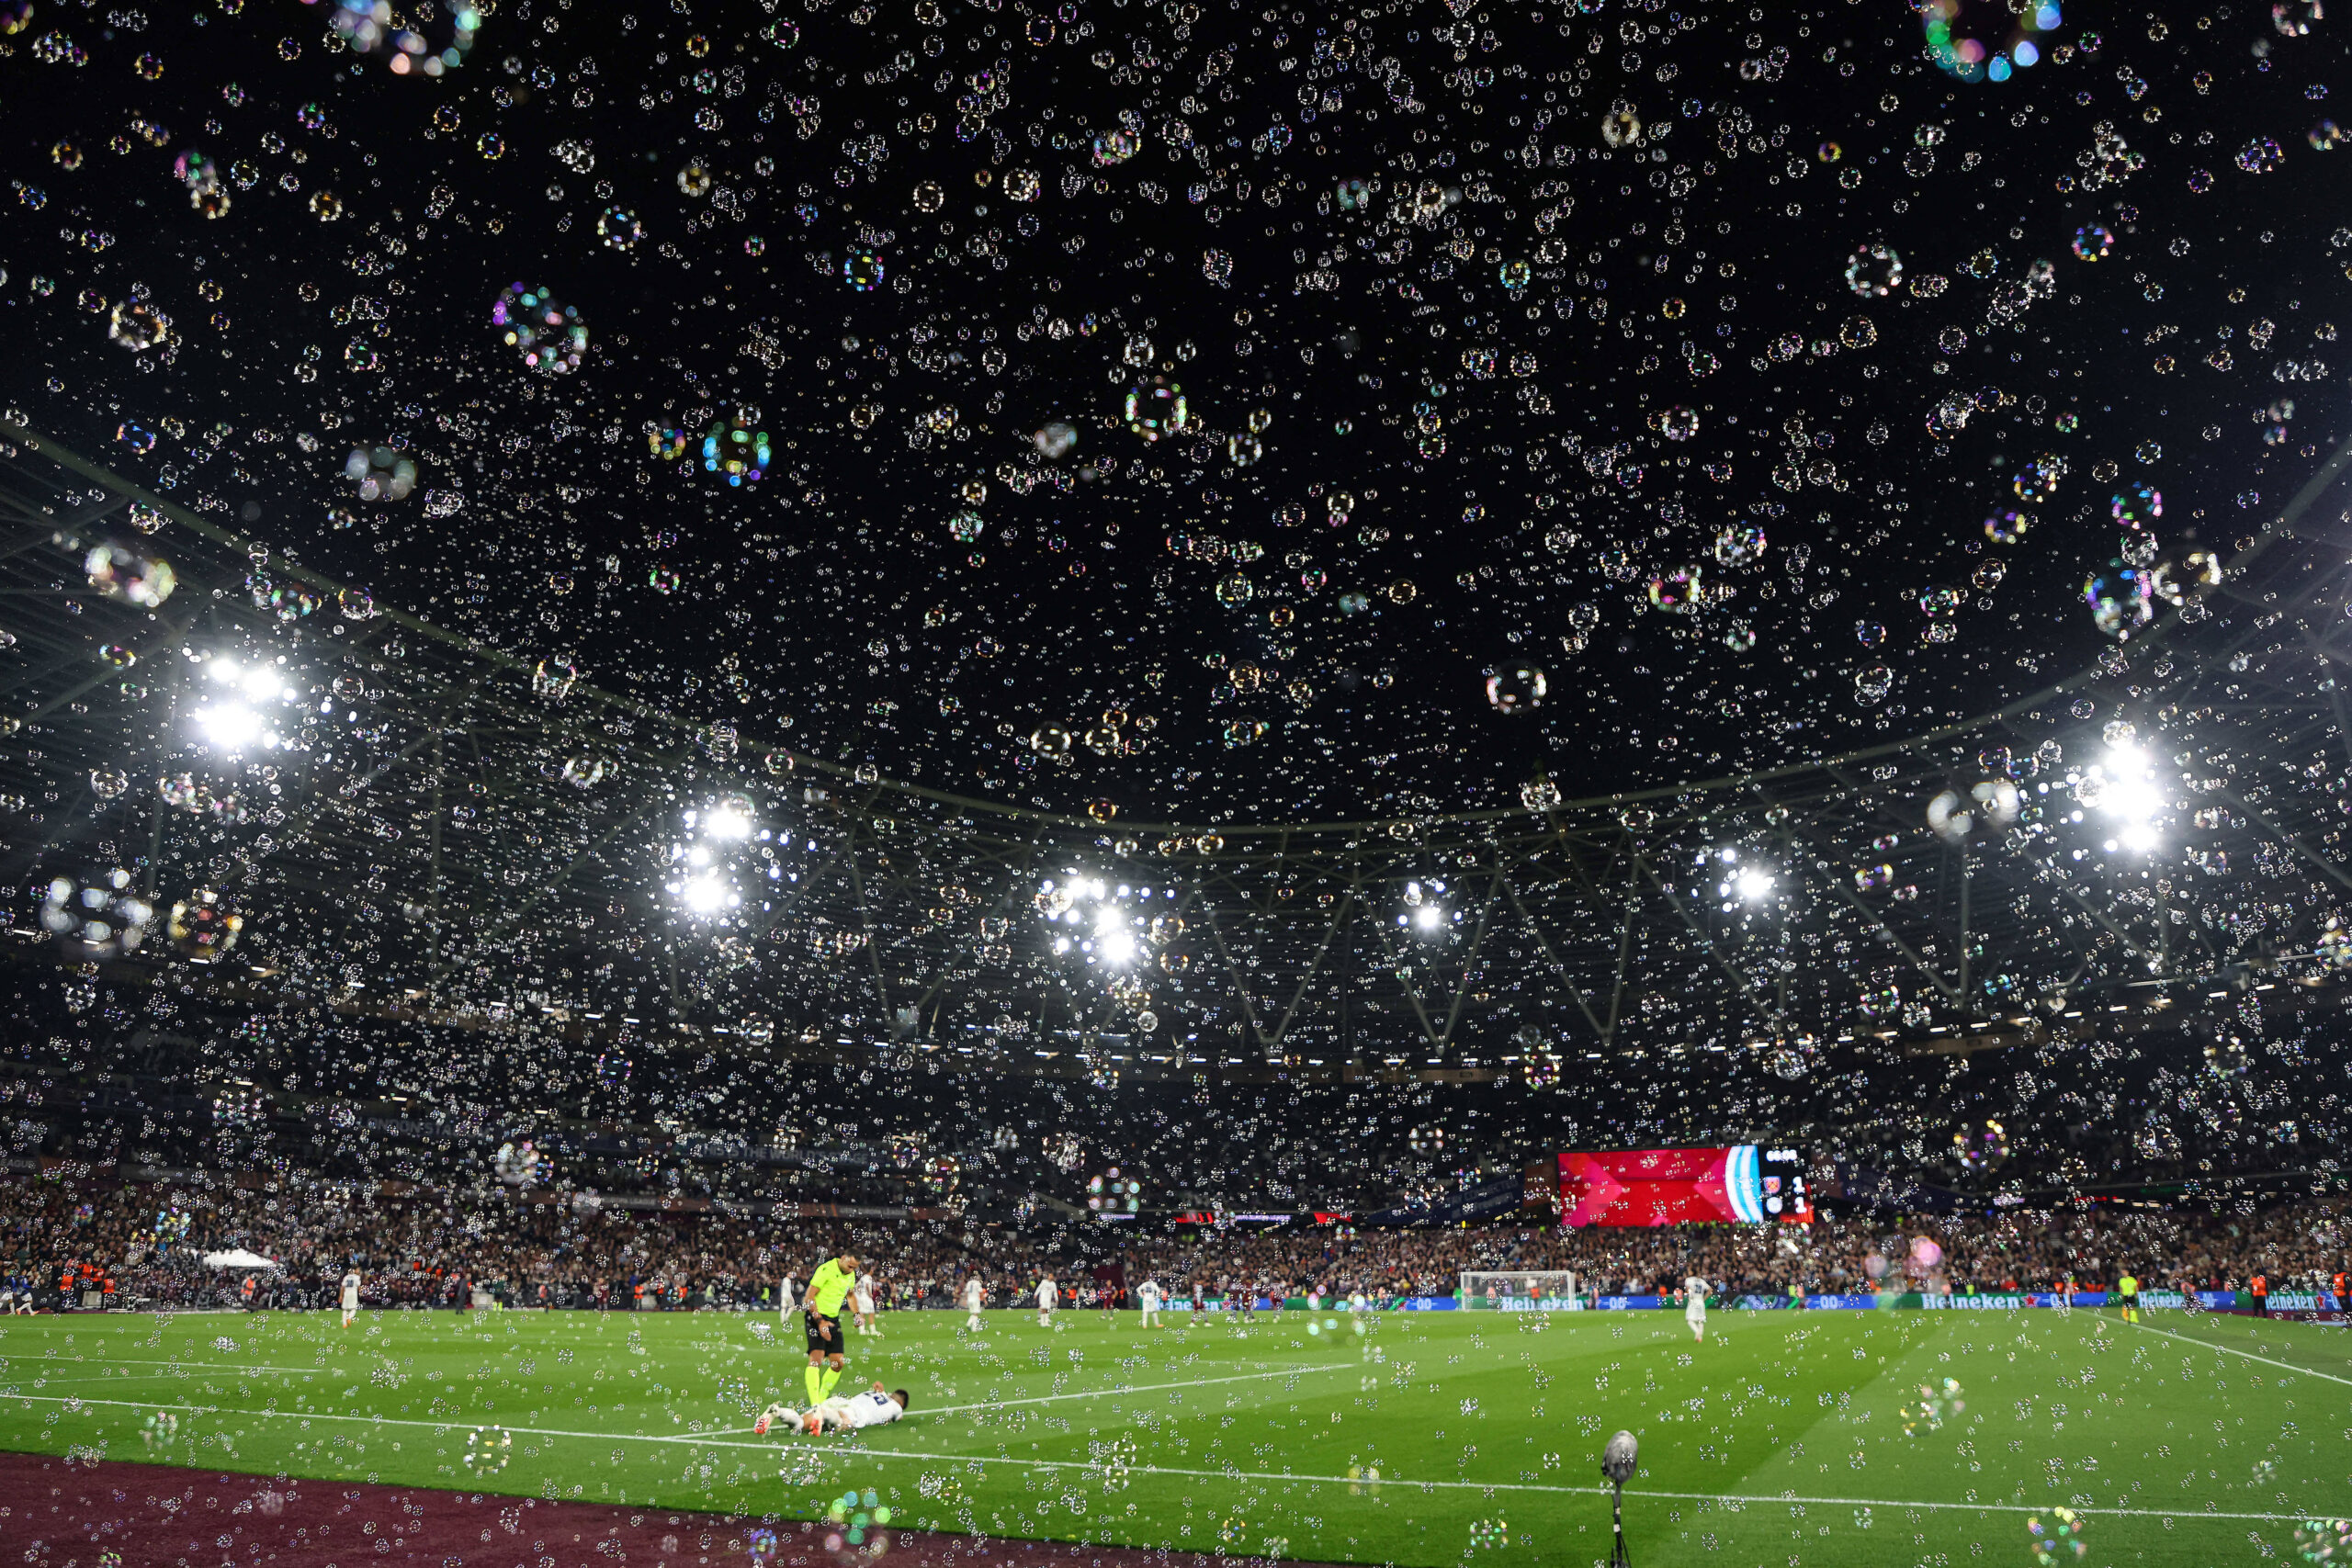 West Ham's London Stadium with bubbles blowing in celebration